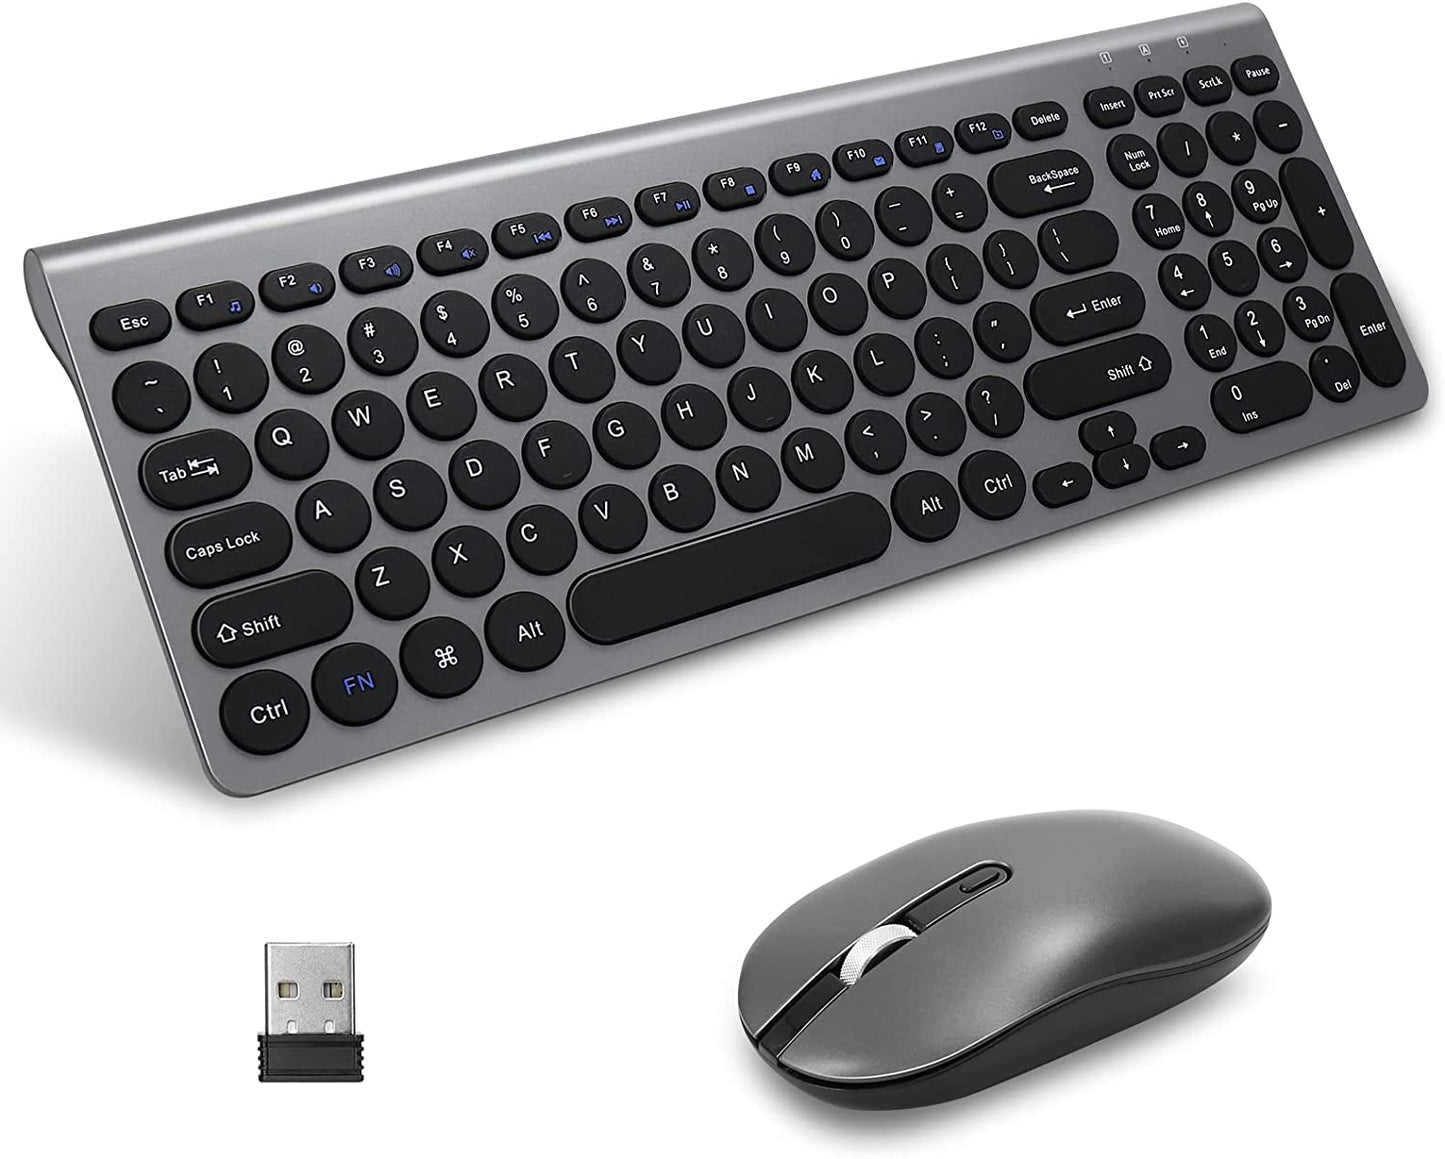 MEANHIGH Wireless Keyboard and Mouse Combo, 2.4G Cordless Mouse and Keyboard